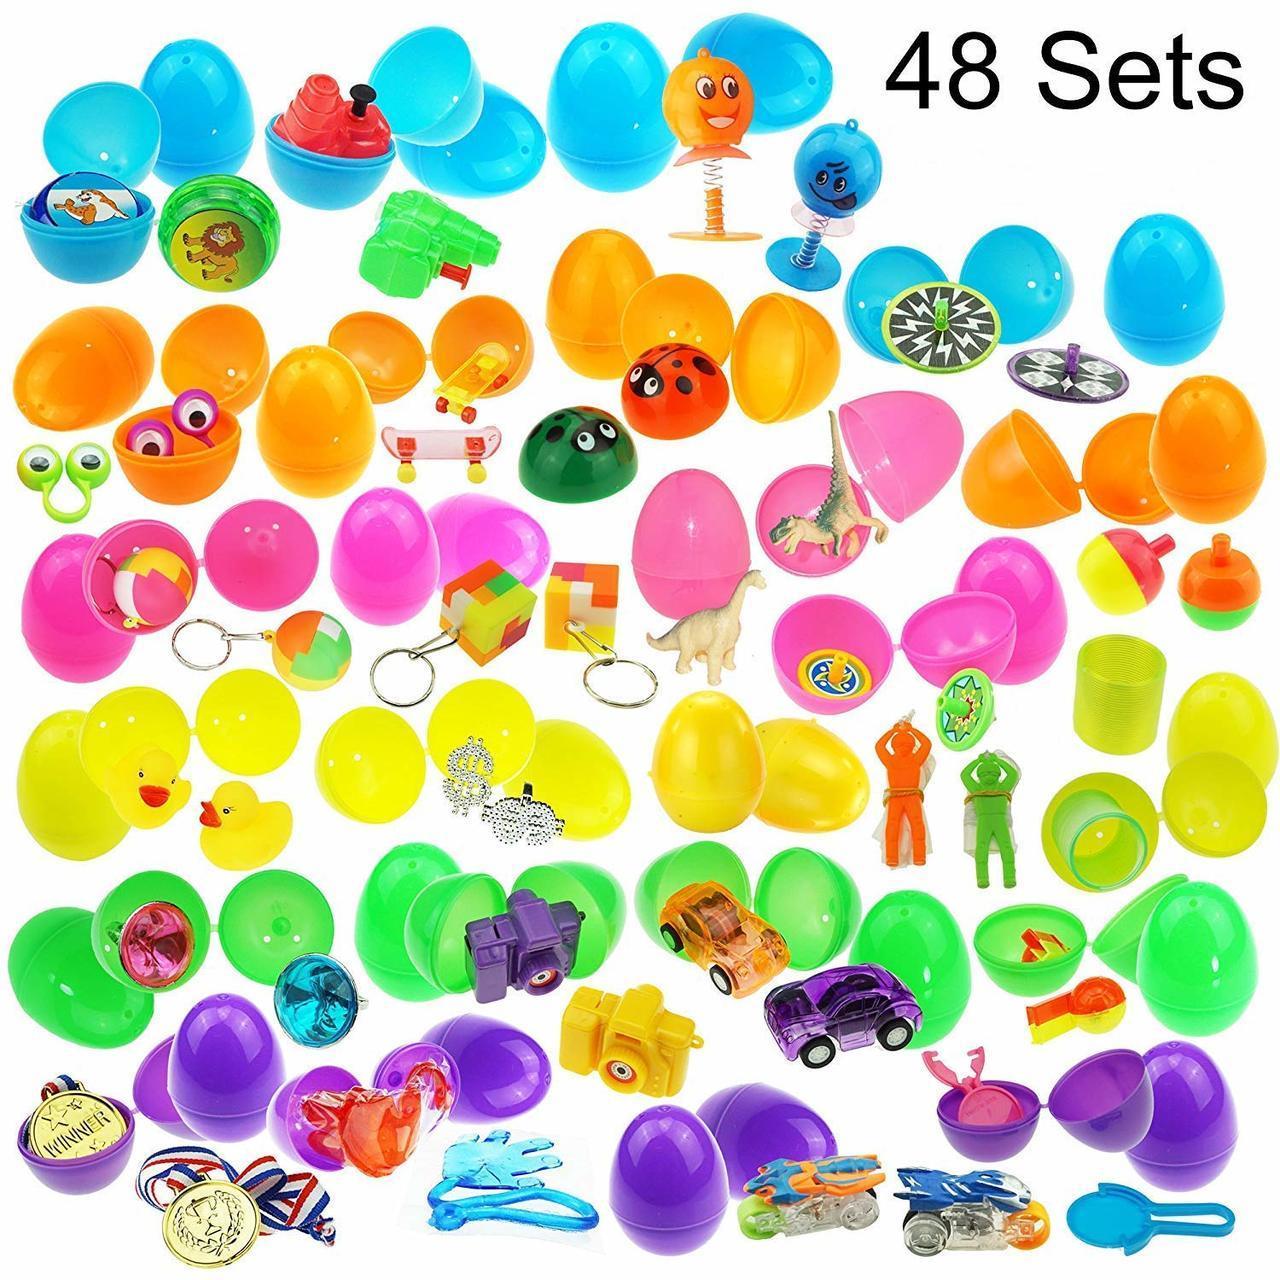 Easter Eggs Pre-filled With Surprise Toys, 48-pack